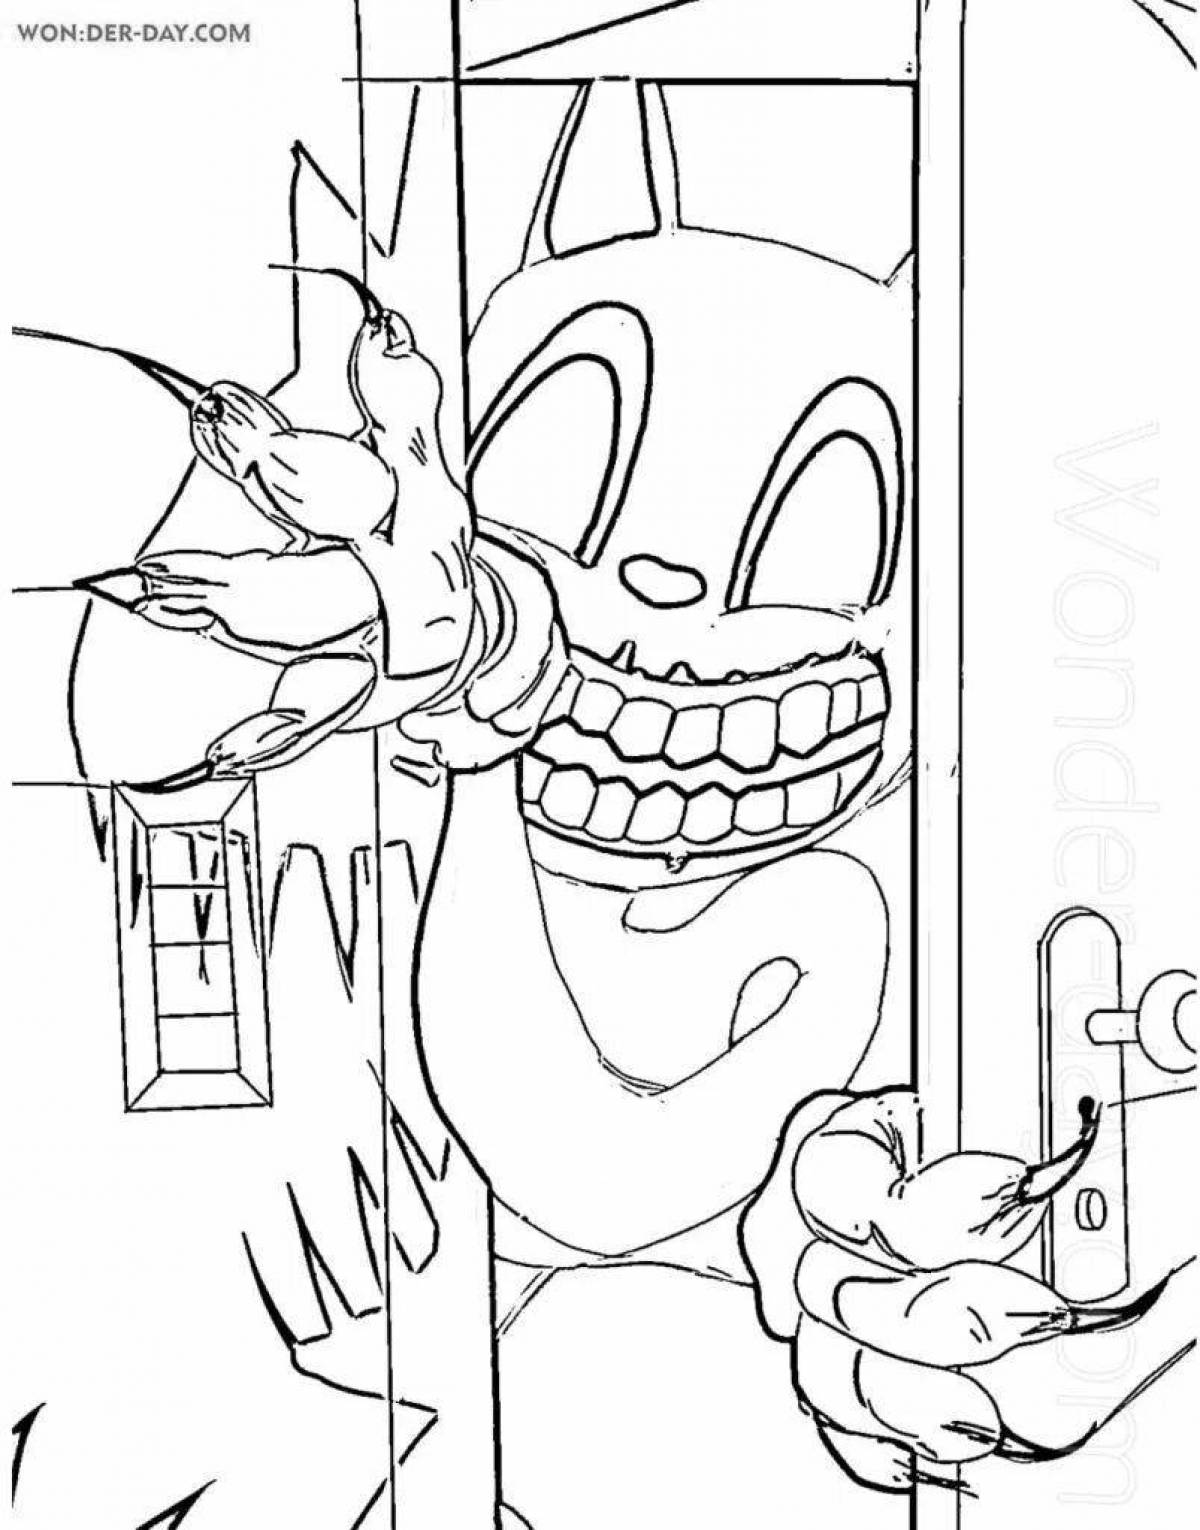 Coloring page marvelous henderson journey